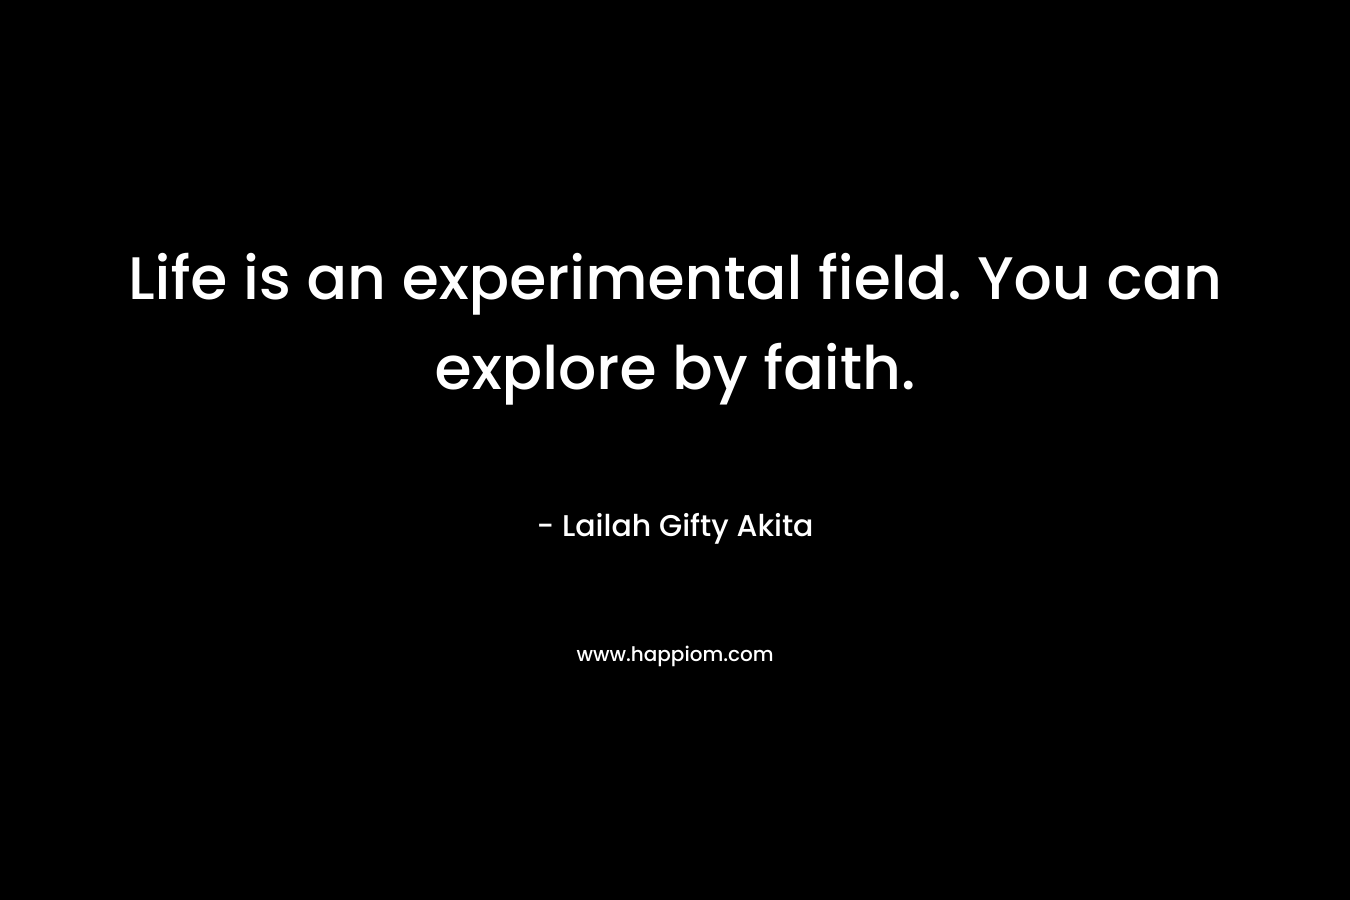 Life is an experimental field. You can explore by faith.